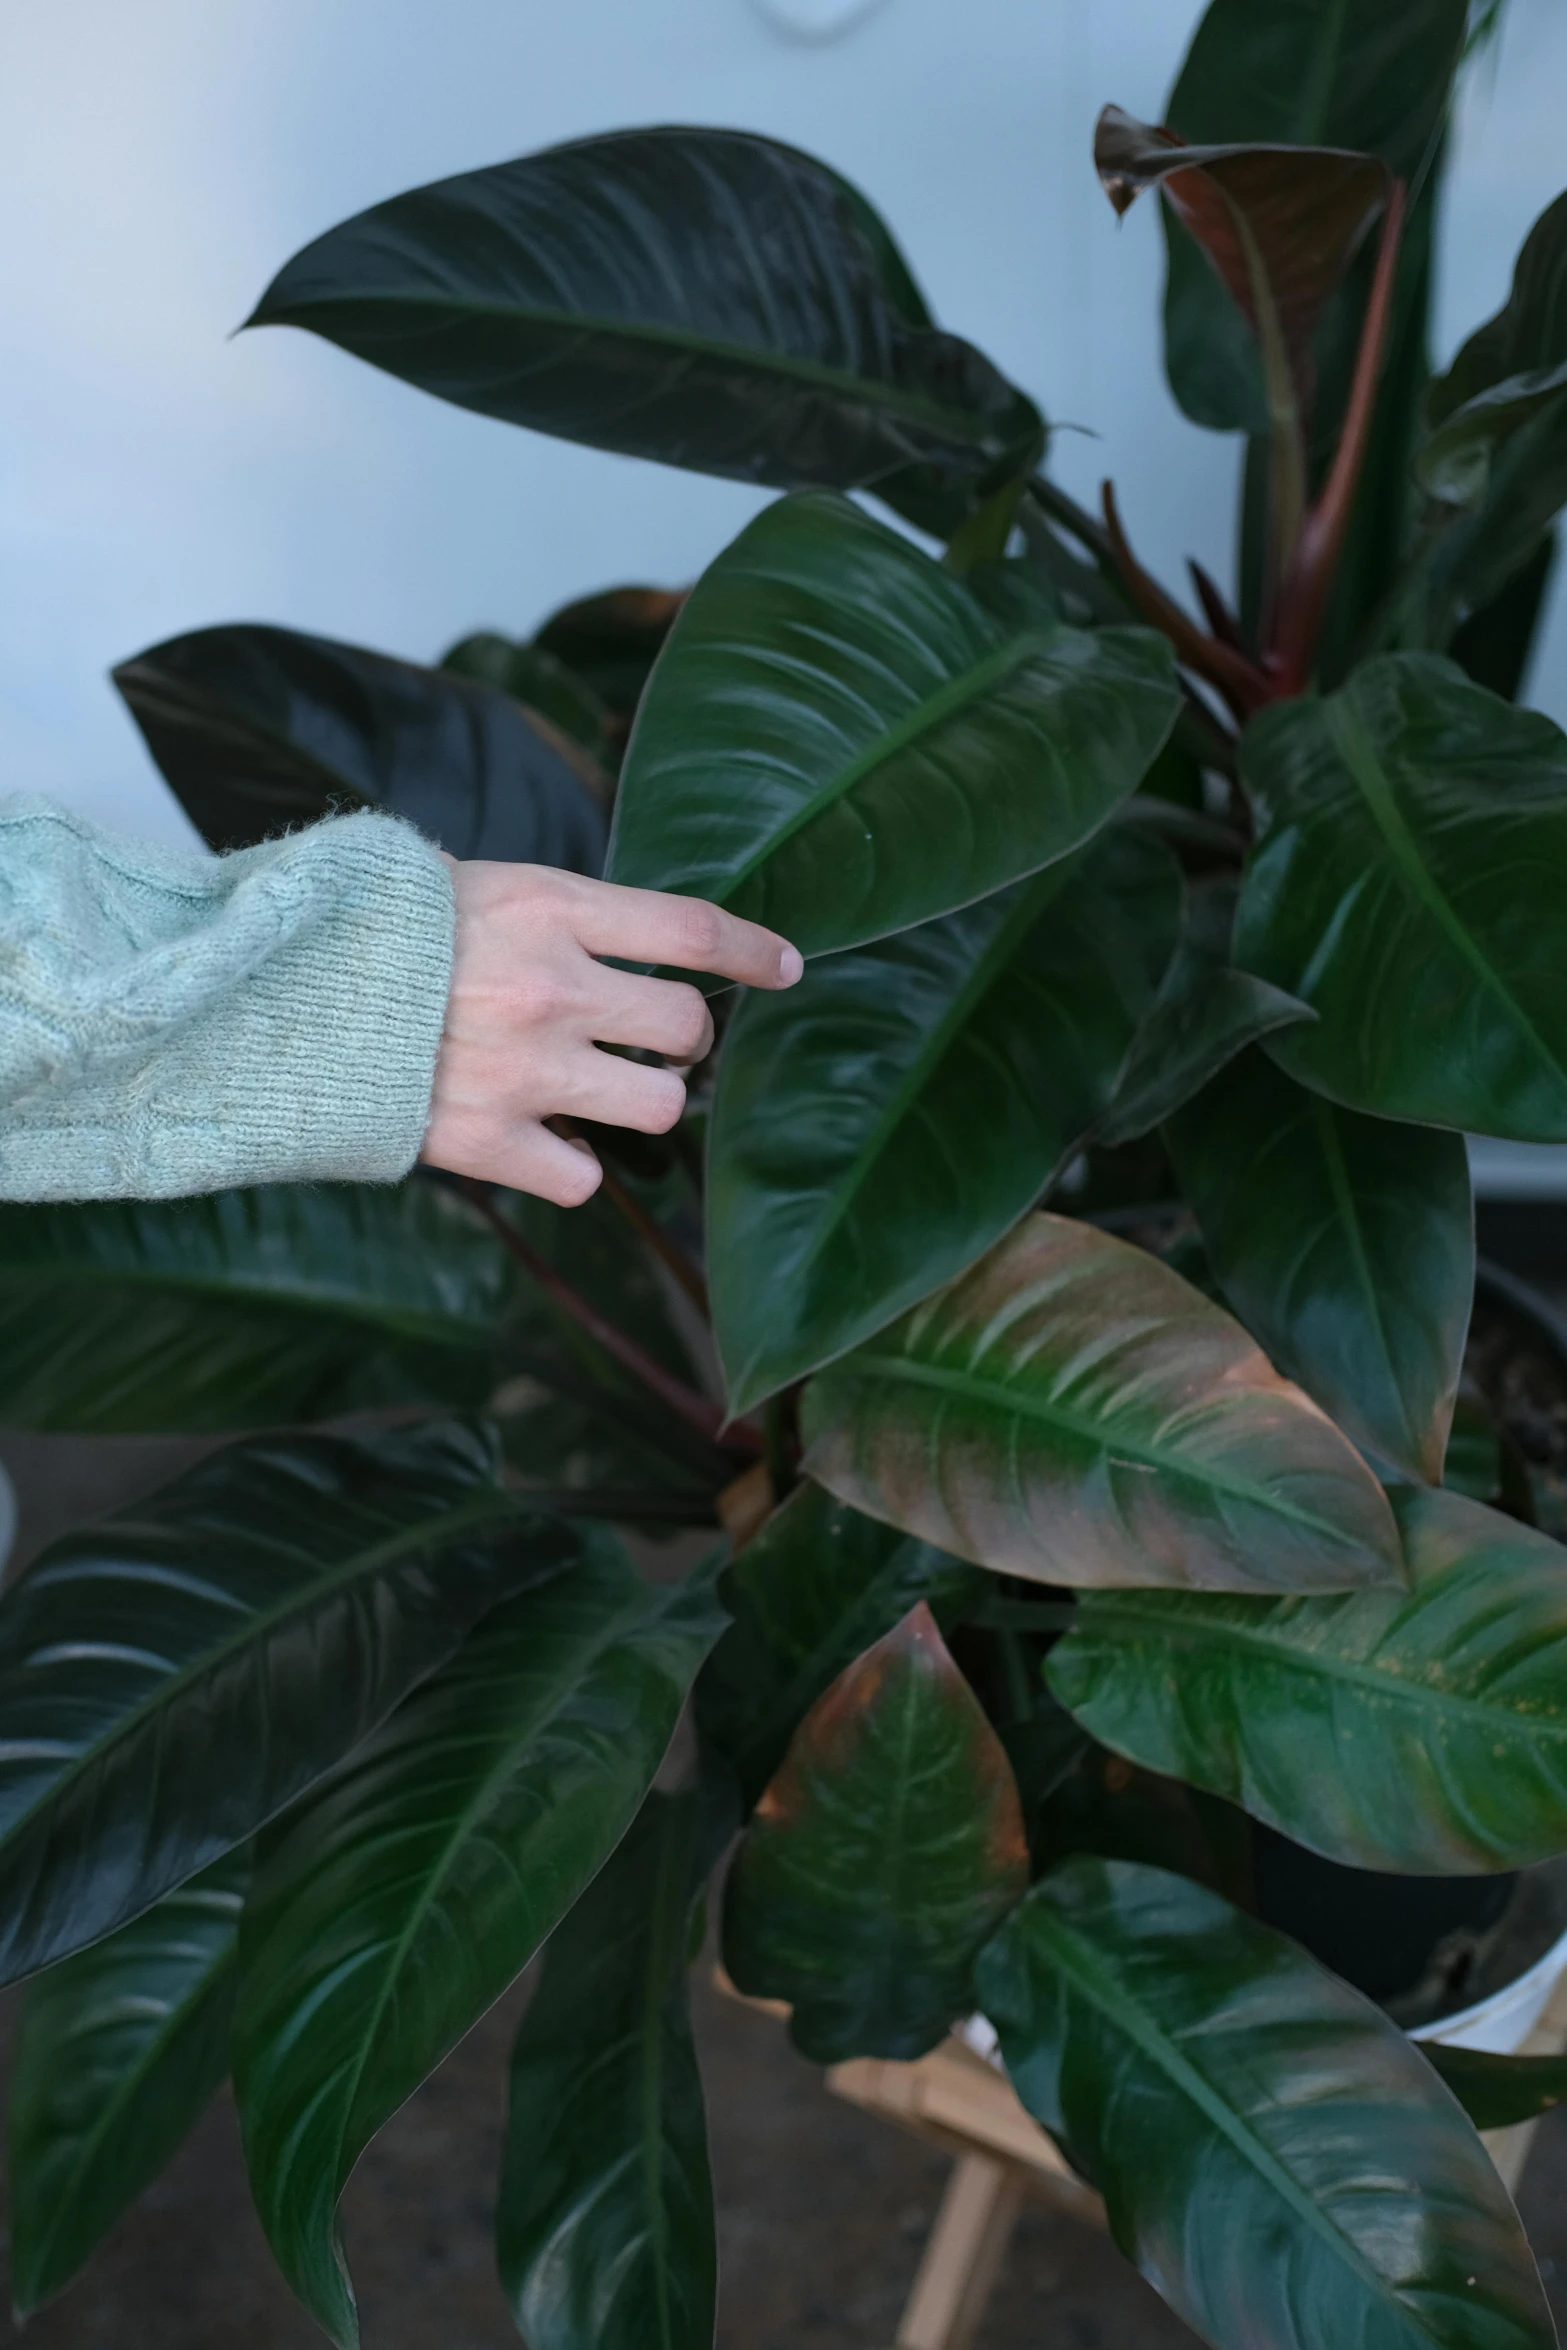 a person's hand that is holding a plant with dark green leaves